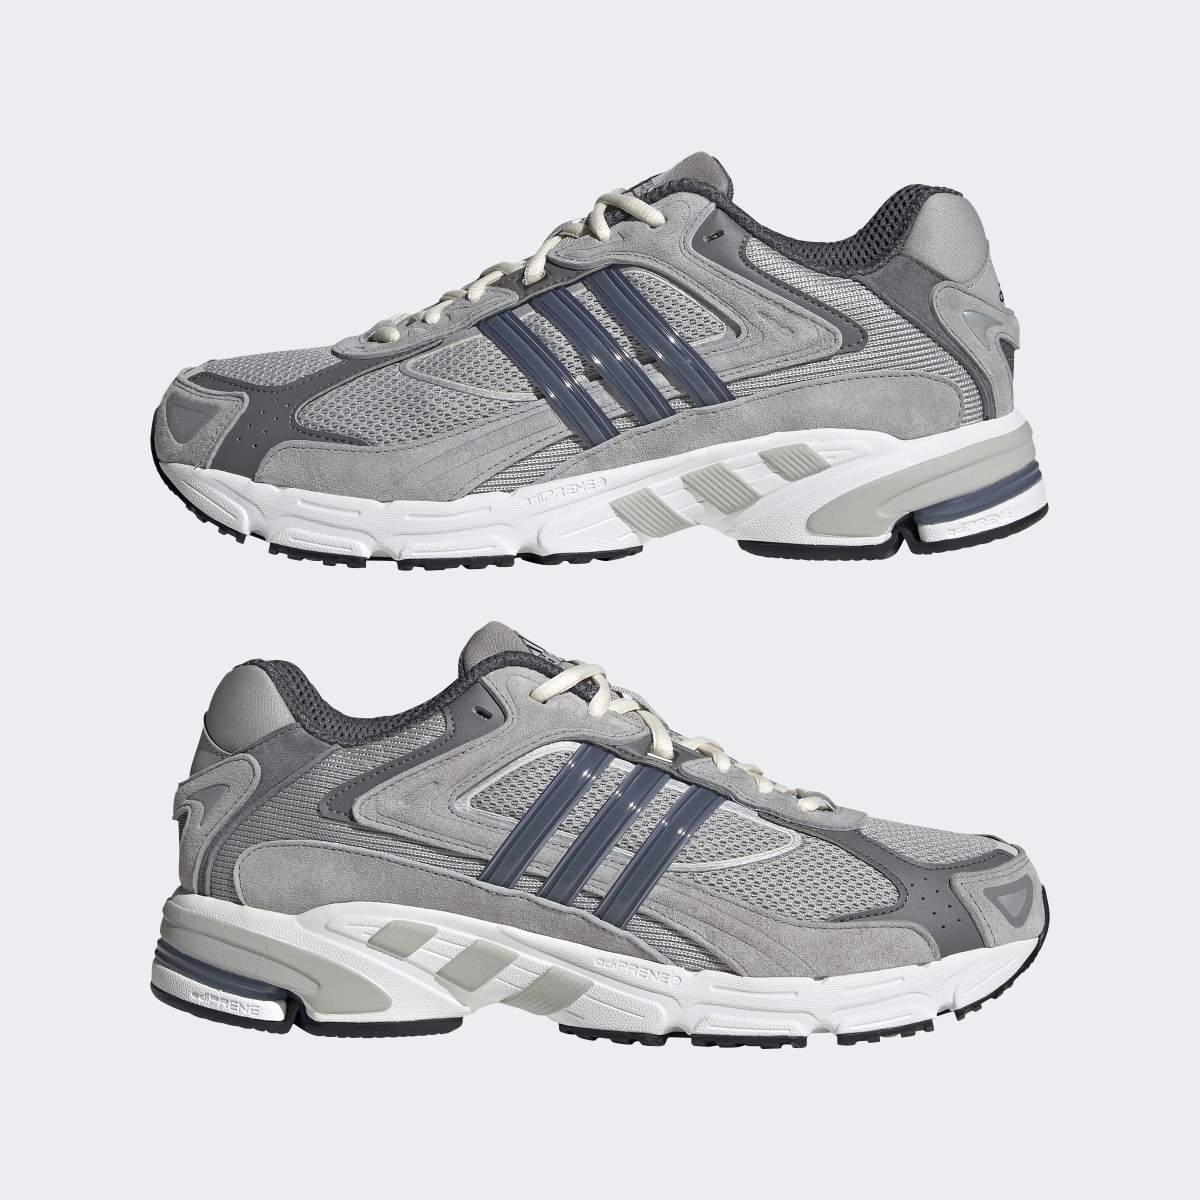 Adidas Chaussure Response CL. 10